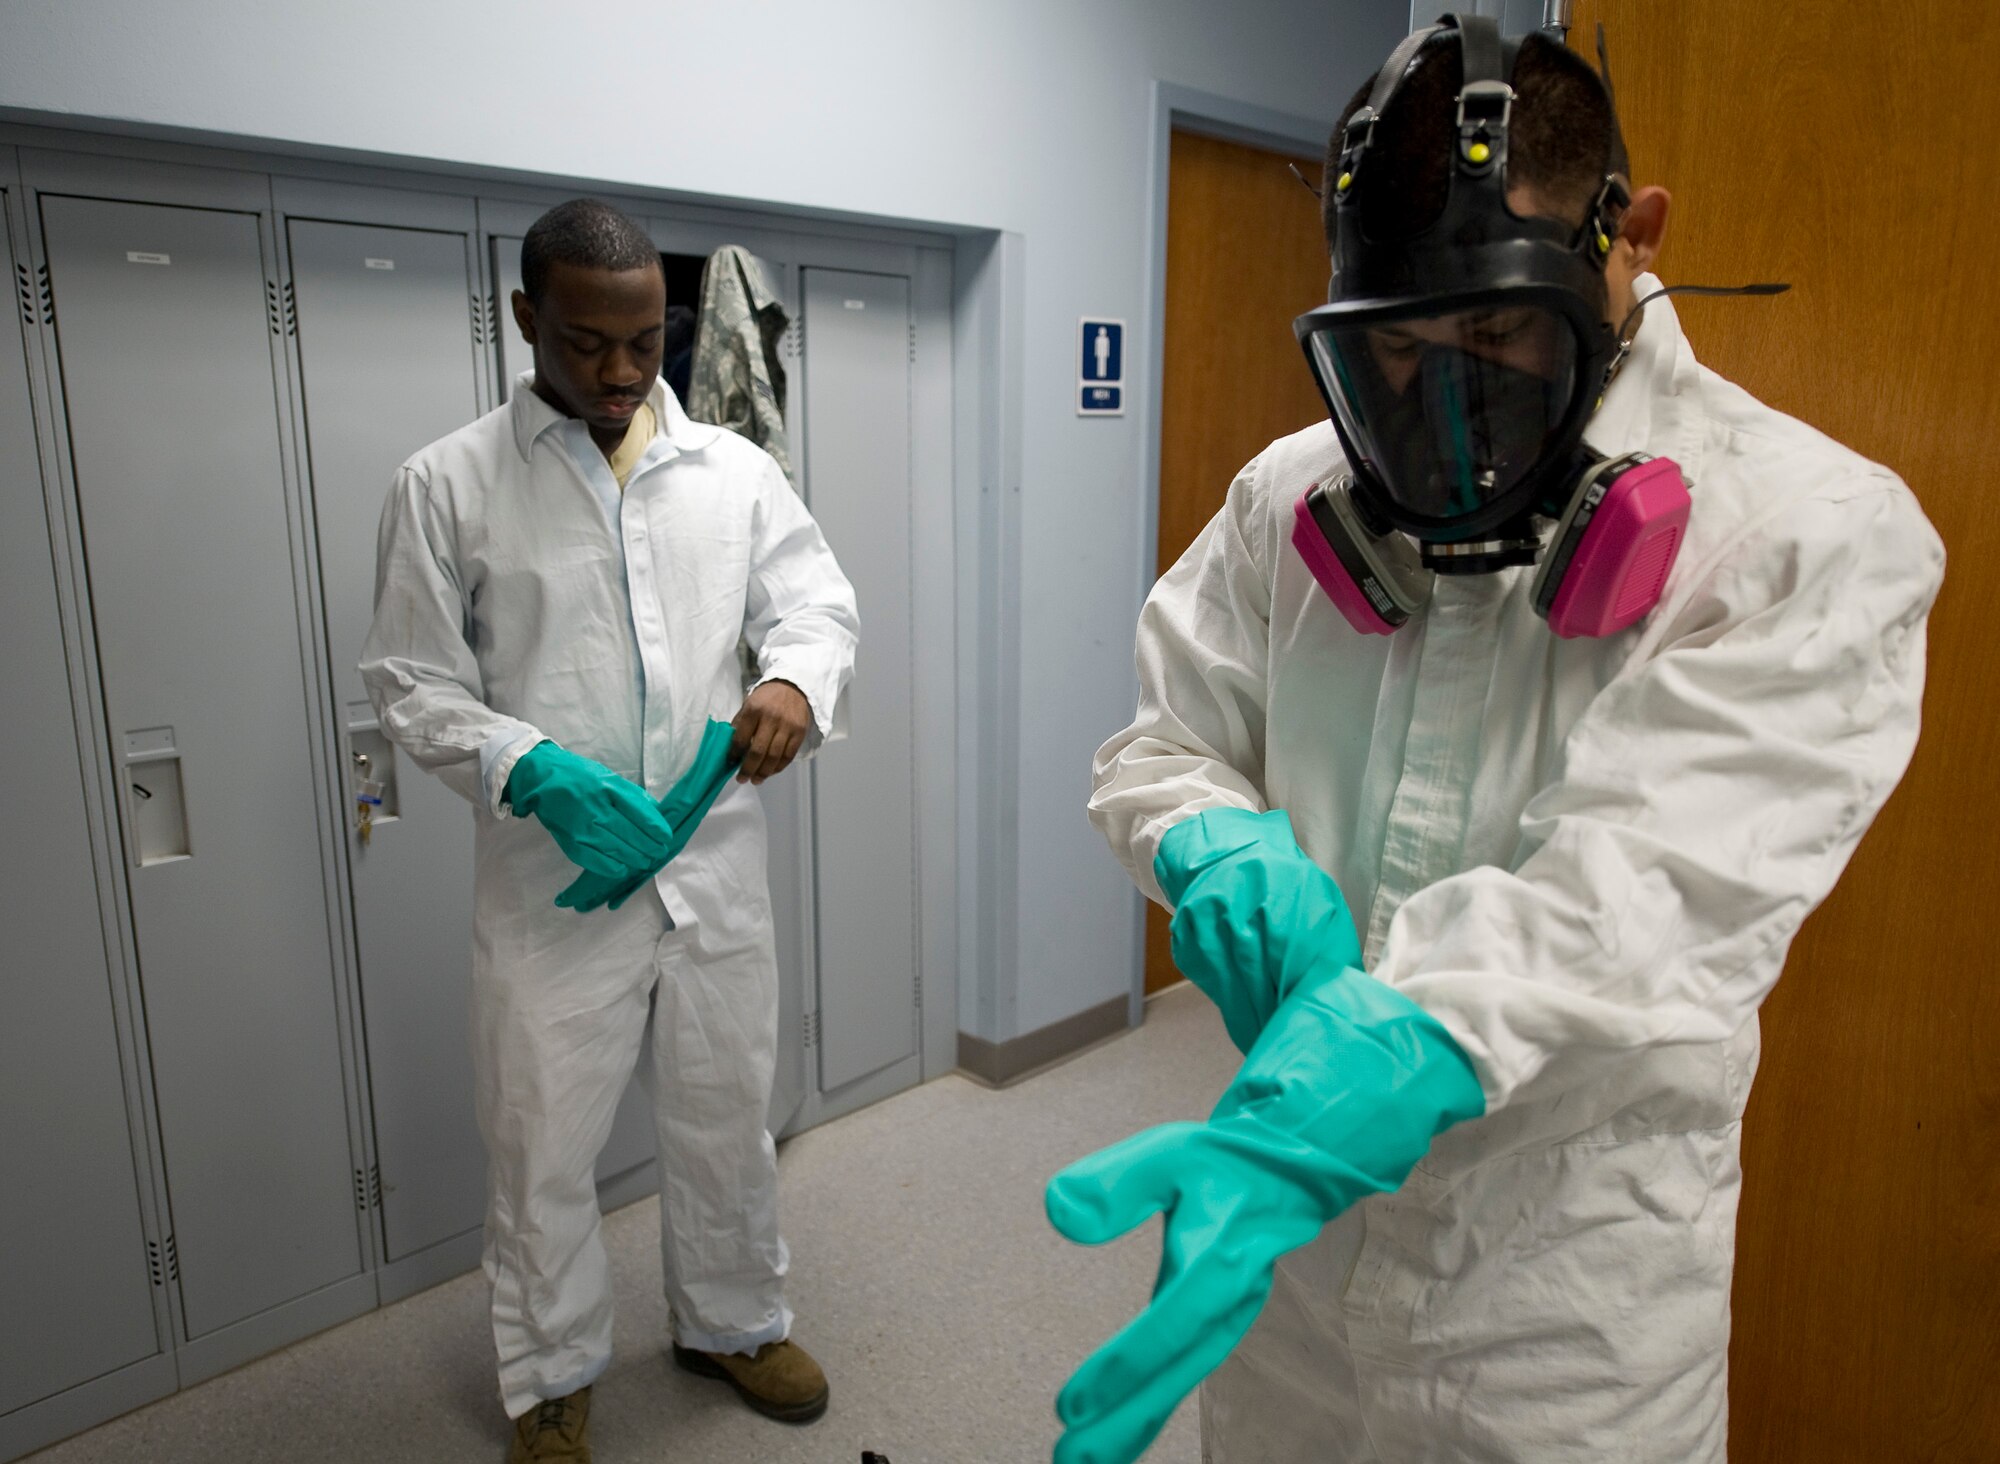 Senior Airman Thomas Davis and Senior Airman Jose Pinzon-Galarza, 2nd Civil Engineer Squadron Pest Management Flight, don protective gear on Barksdale Air Force Base, La., Feb. 9. The equipment is meant to protect the Airmen from potentially dangerous chemicals while handling pesticides.  (U.S. Air Force photo/Senior Airman Chad Warren)(RELEASED)